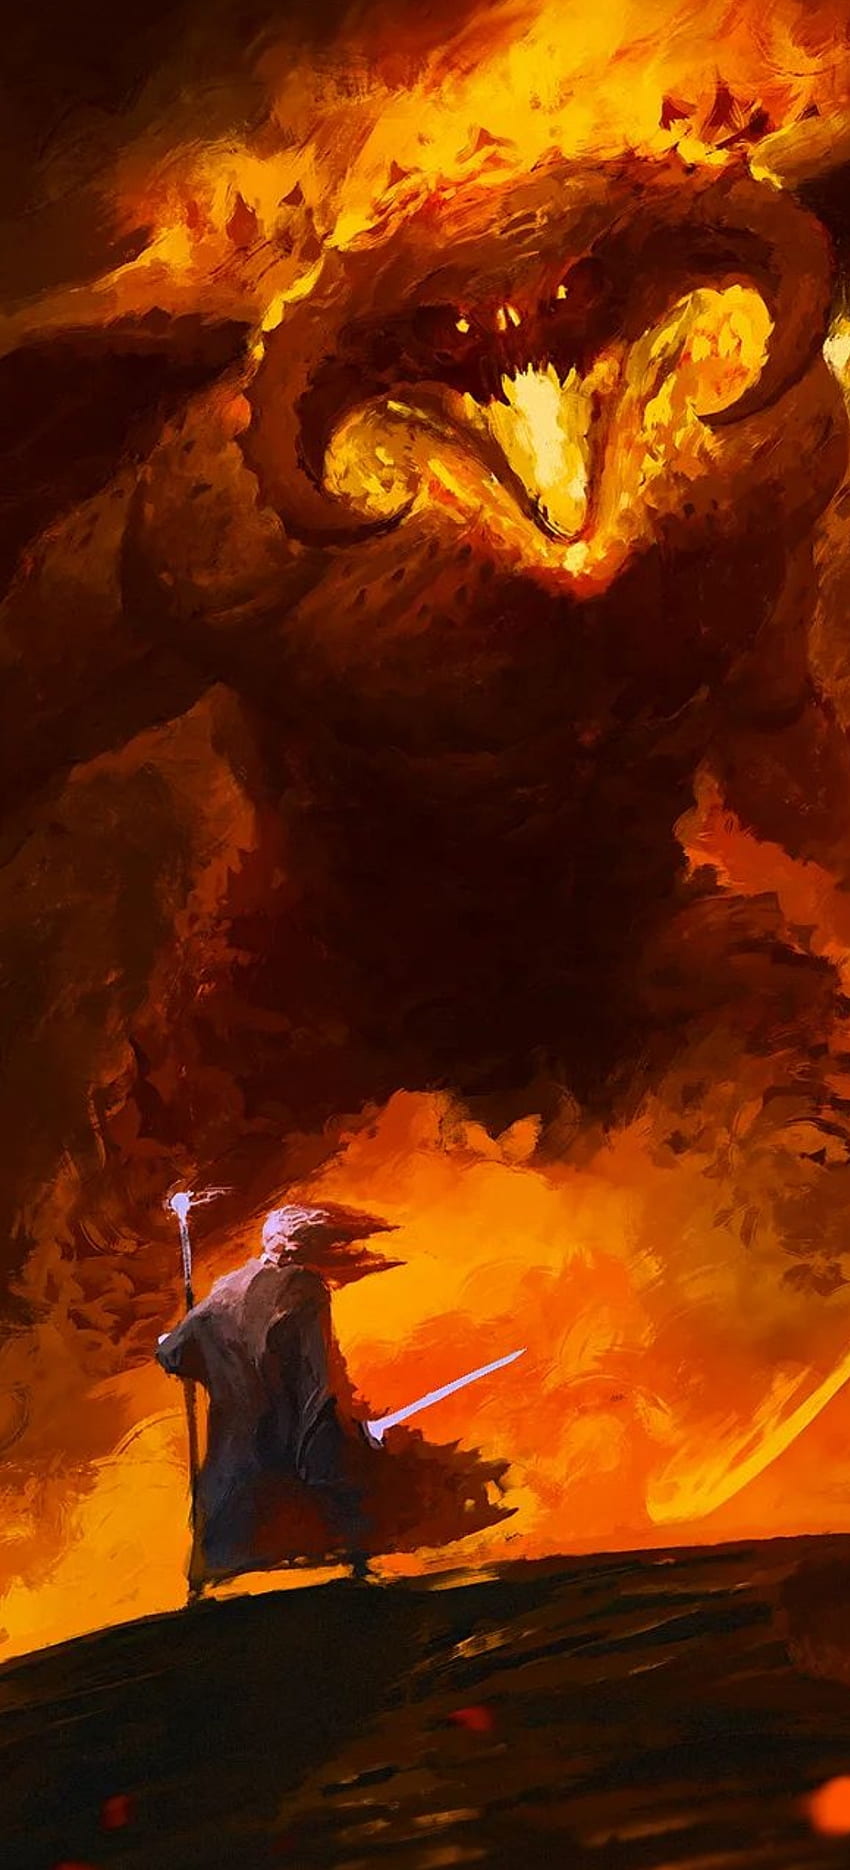 Wallpaper ID 1467509  Balrog 4K Gandalf The Lord of the Rings free  download